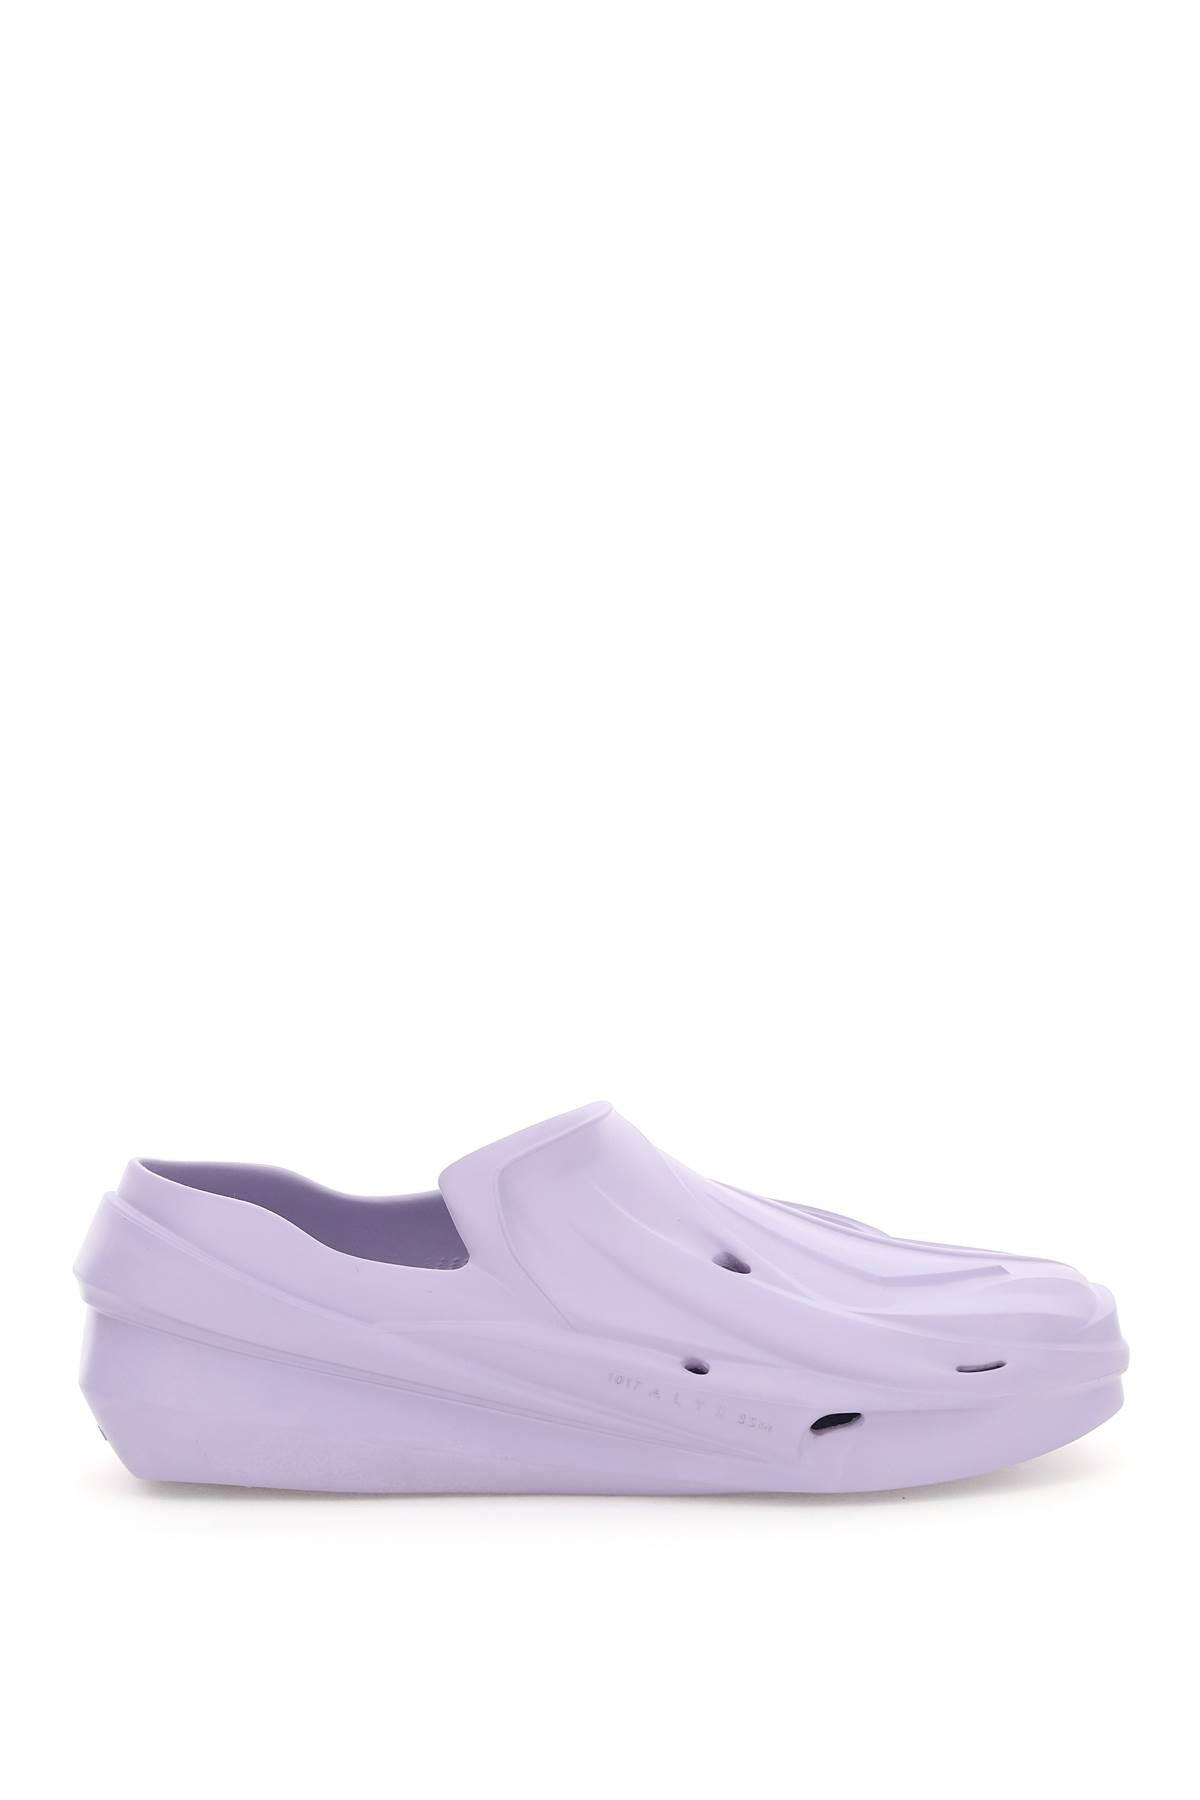 1017 ALYX 9SM Mono Slip On Shoes in Purple for Men - Save 53% | Lyst